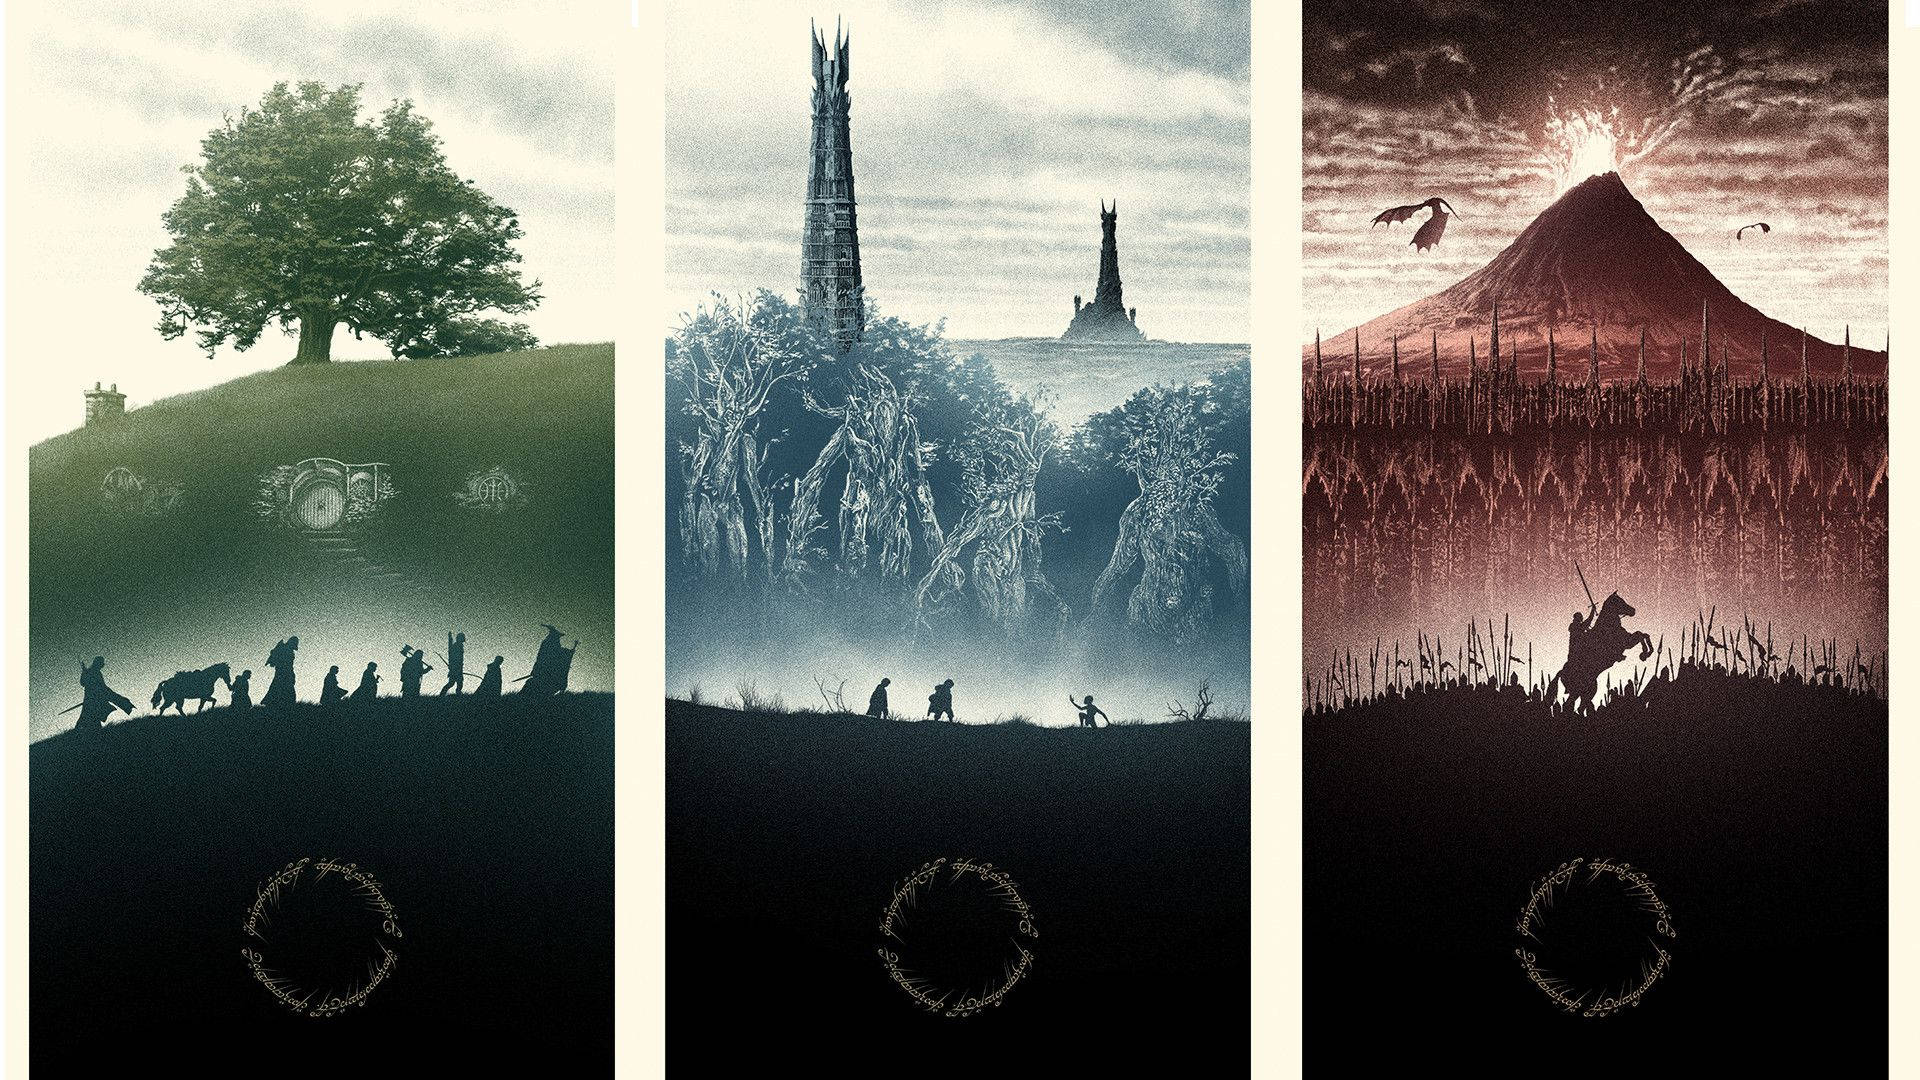 Free Lord Of The Rings Wallpaper Downloads, [200+] Lord Of The Rings  Wallpapers for FREE 